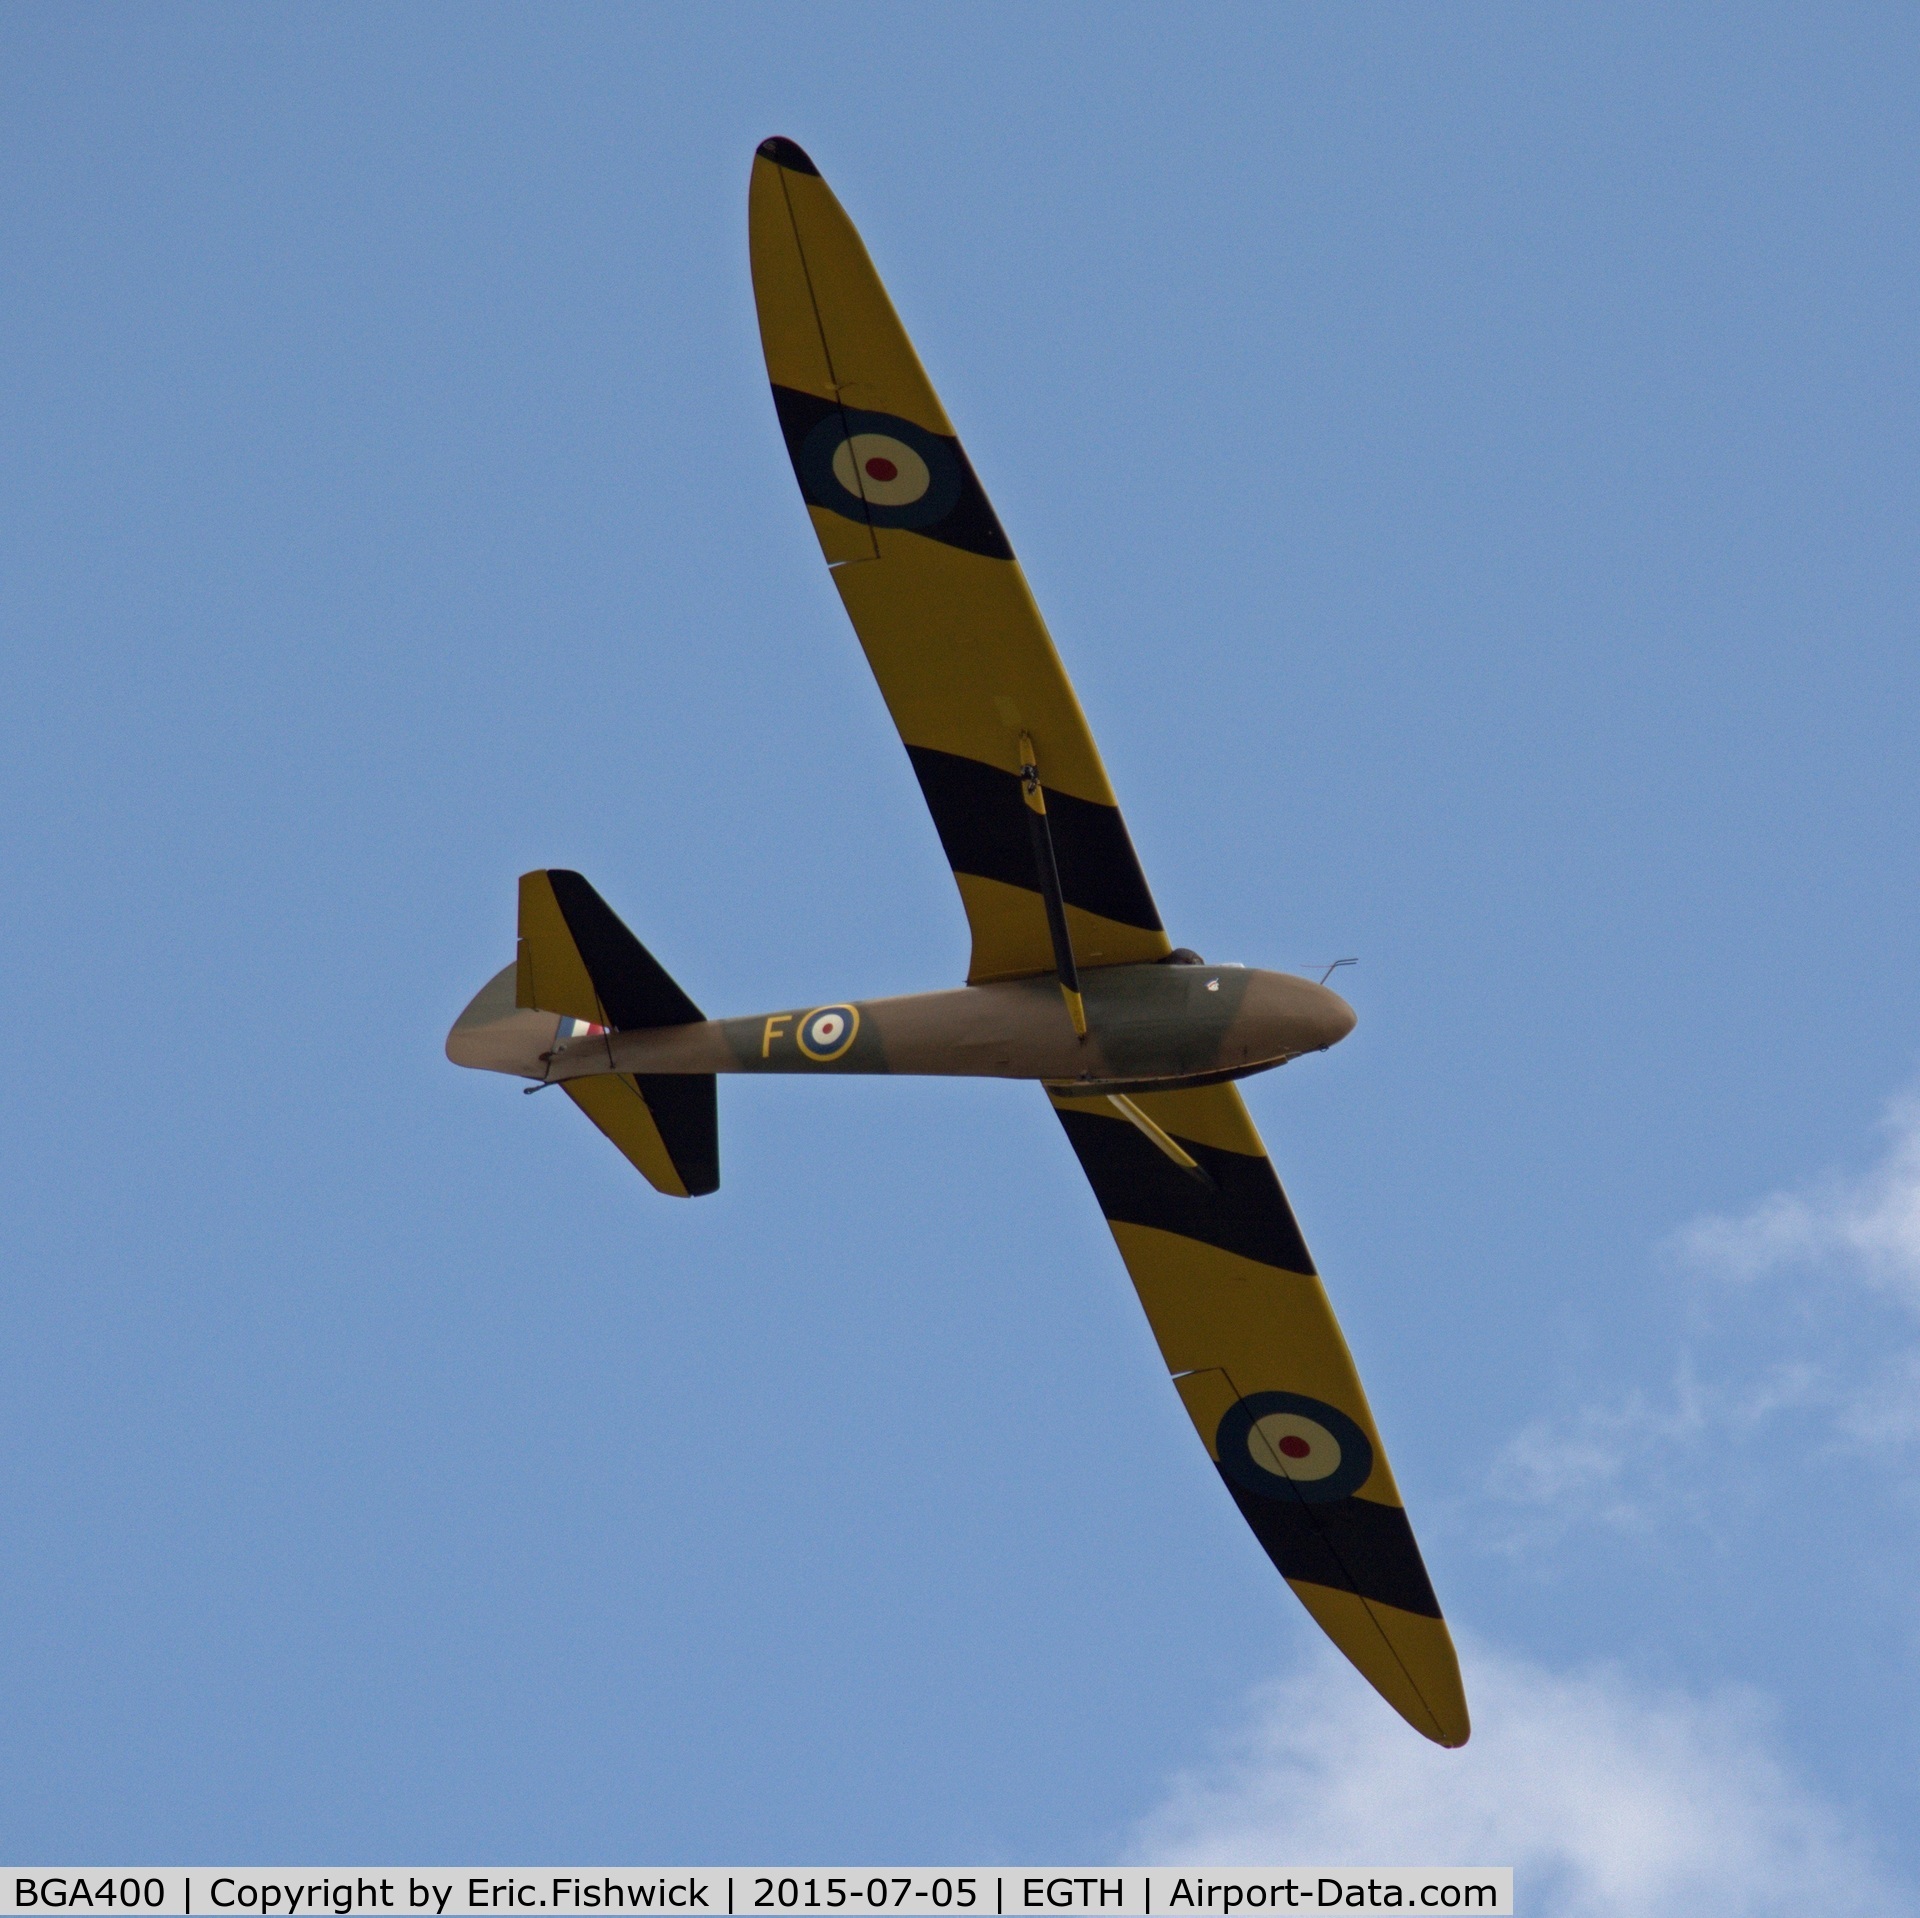 BGA400, Slingsby T-6 Kite 1 C/N 355A, 44. BGA400 - 'The Radar Kite' in display mode at the Shuttleworth Military Pagent Airshow, July 2015.